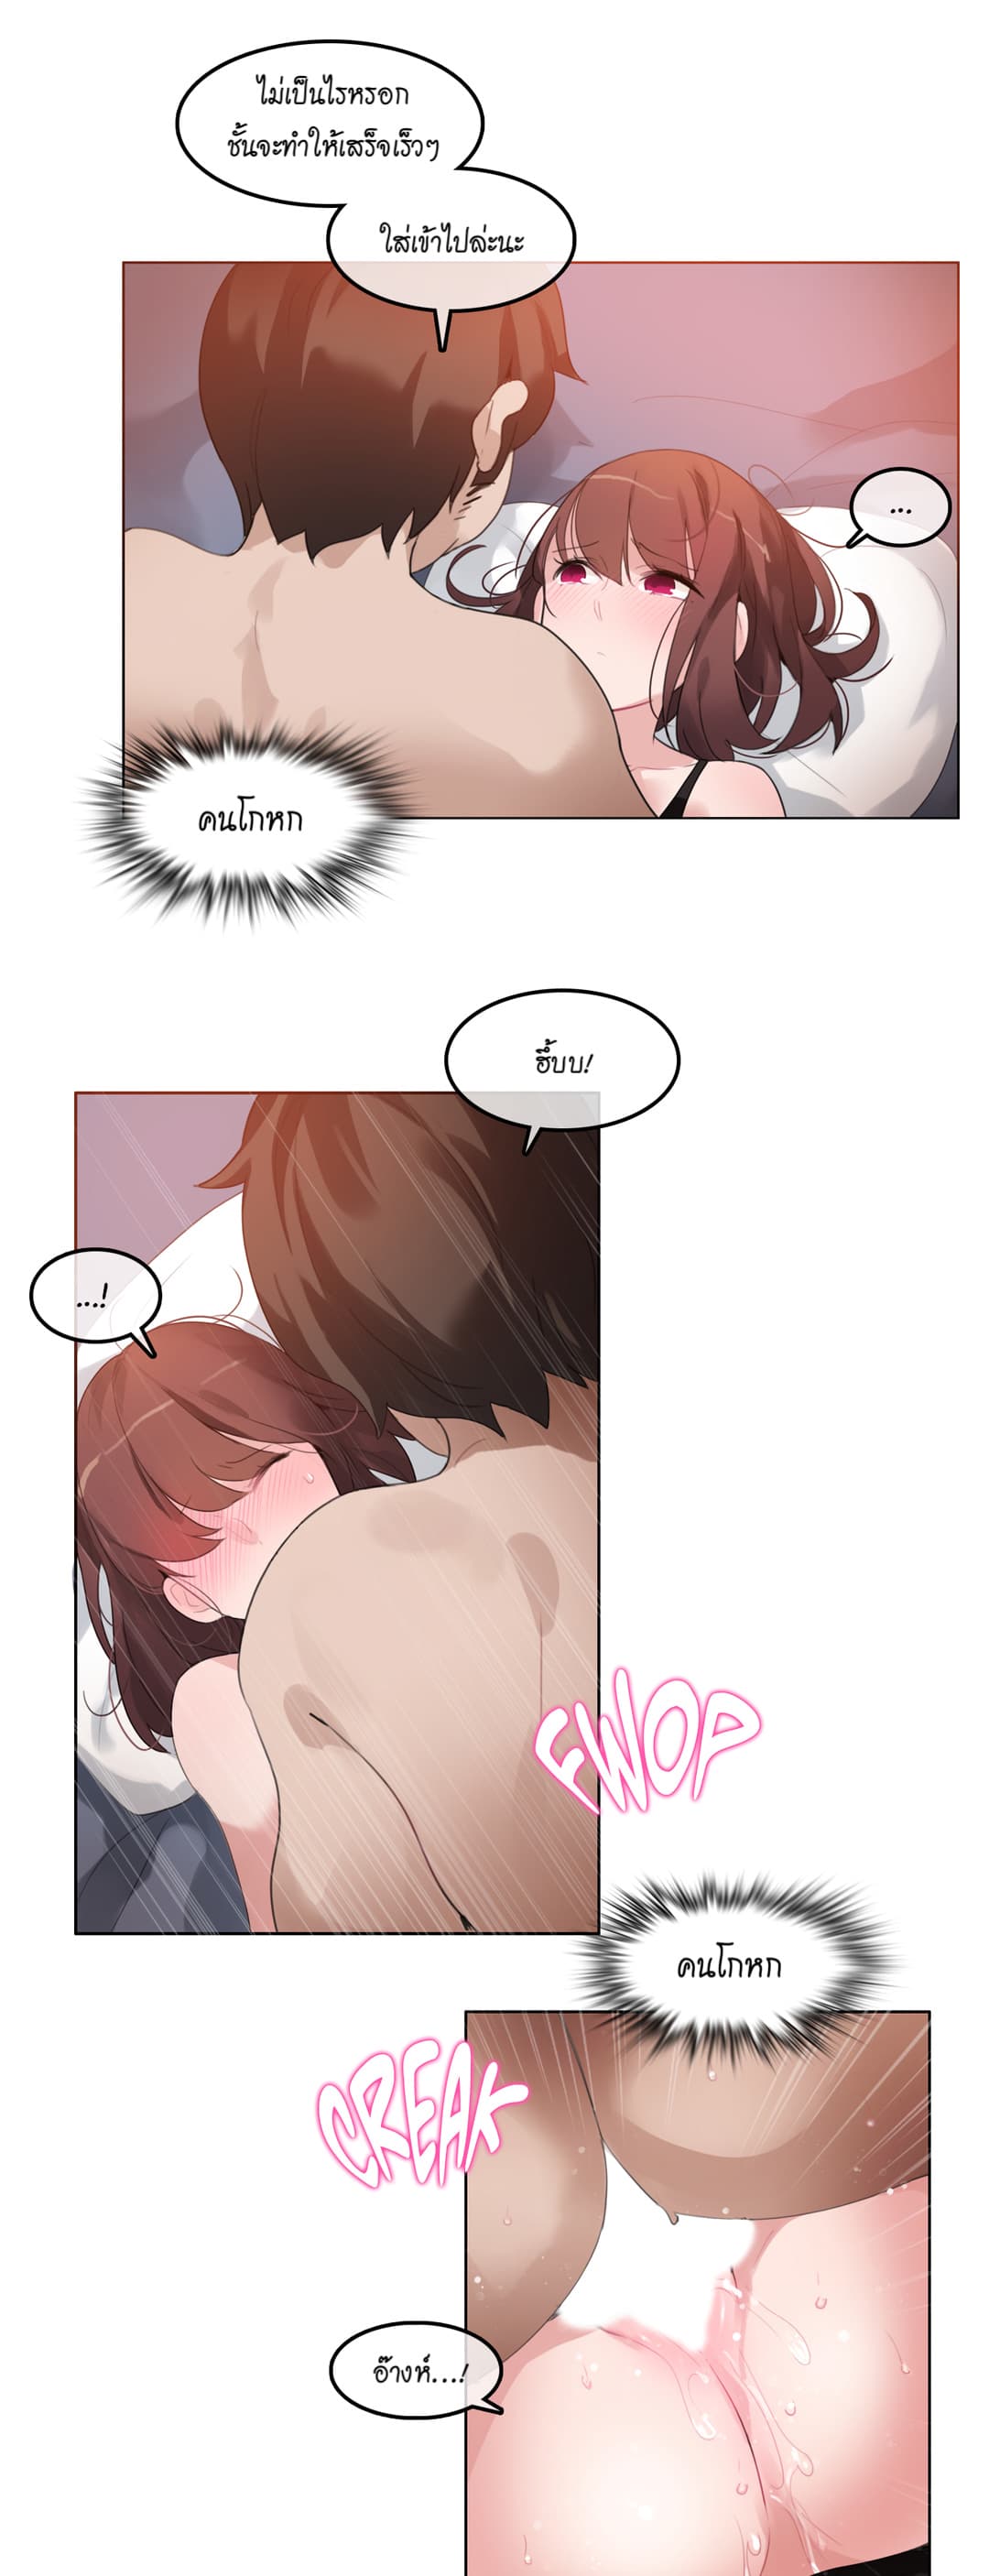 A Pervert’s Daily Life 26 (26)